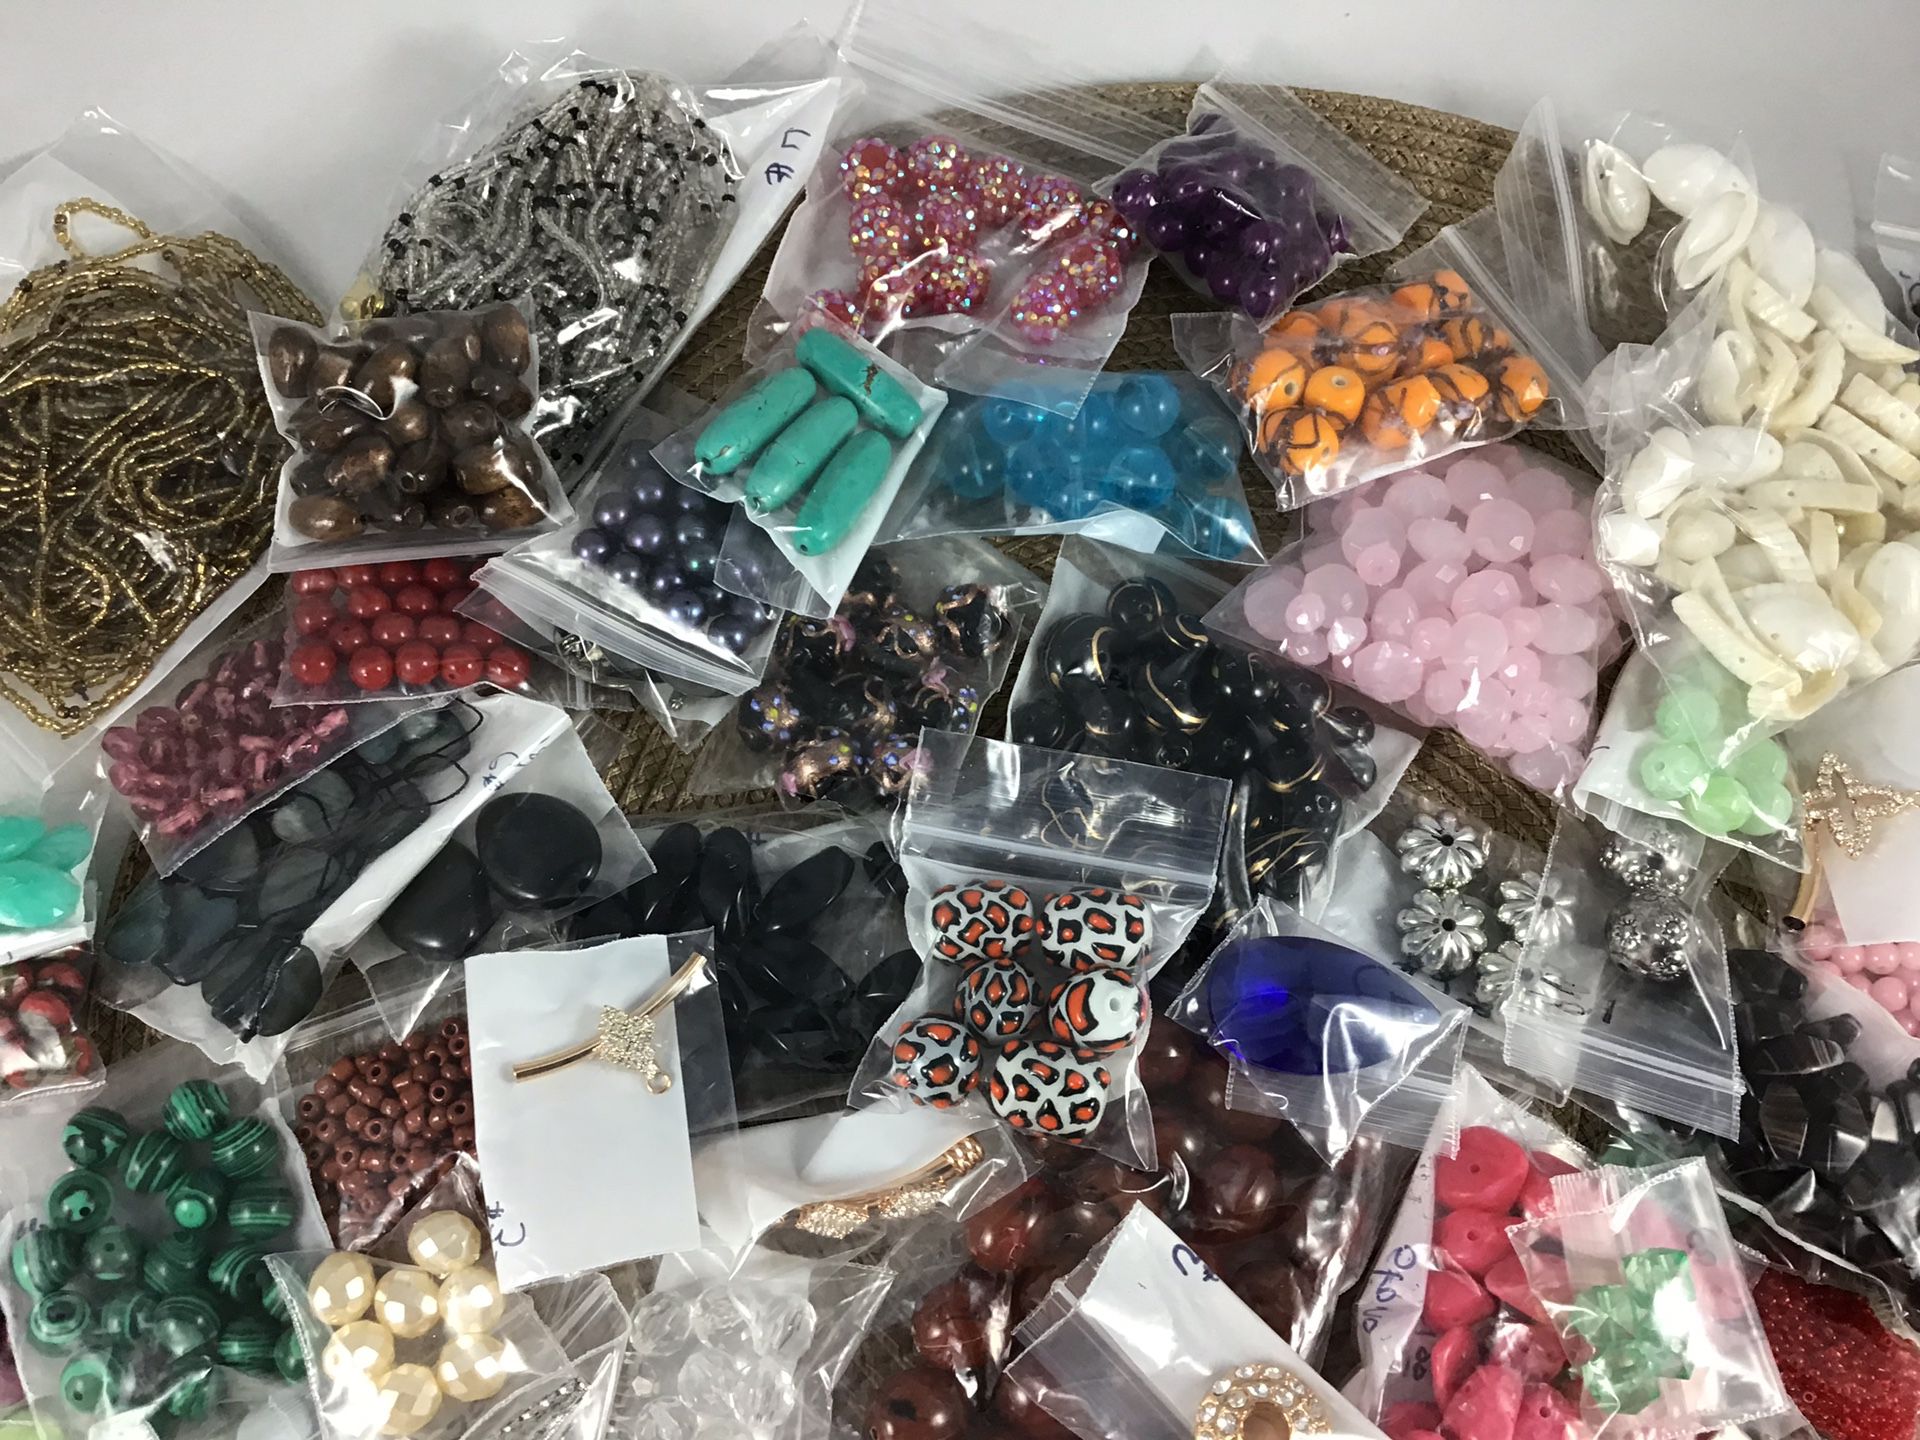 Beads, Beads, Beads! New or Reclaimed from pre-owned jewelry. Cleaned. Prices vary per baggie.